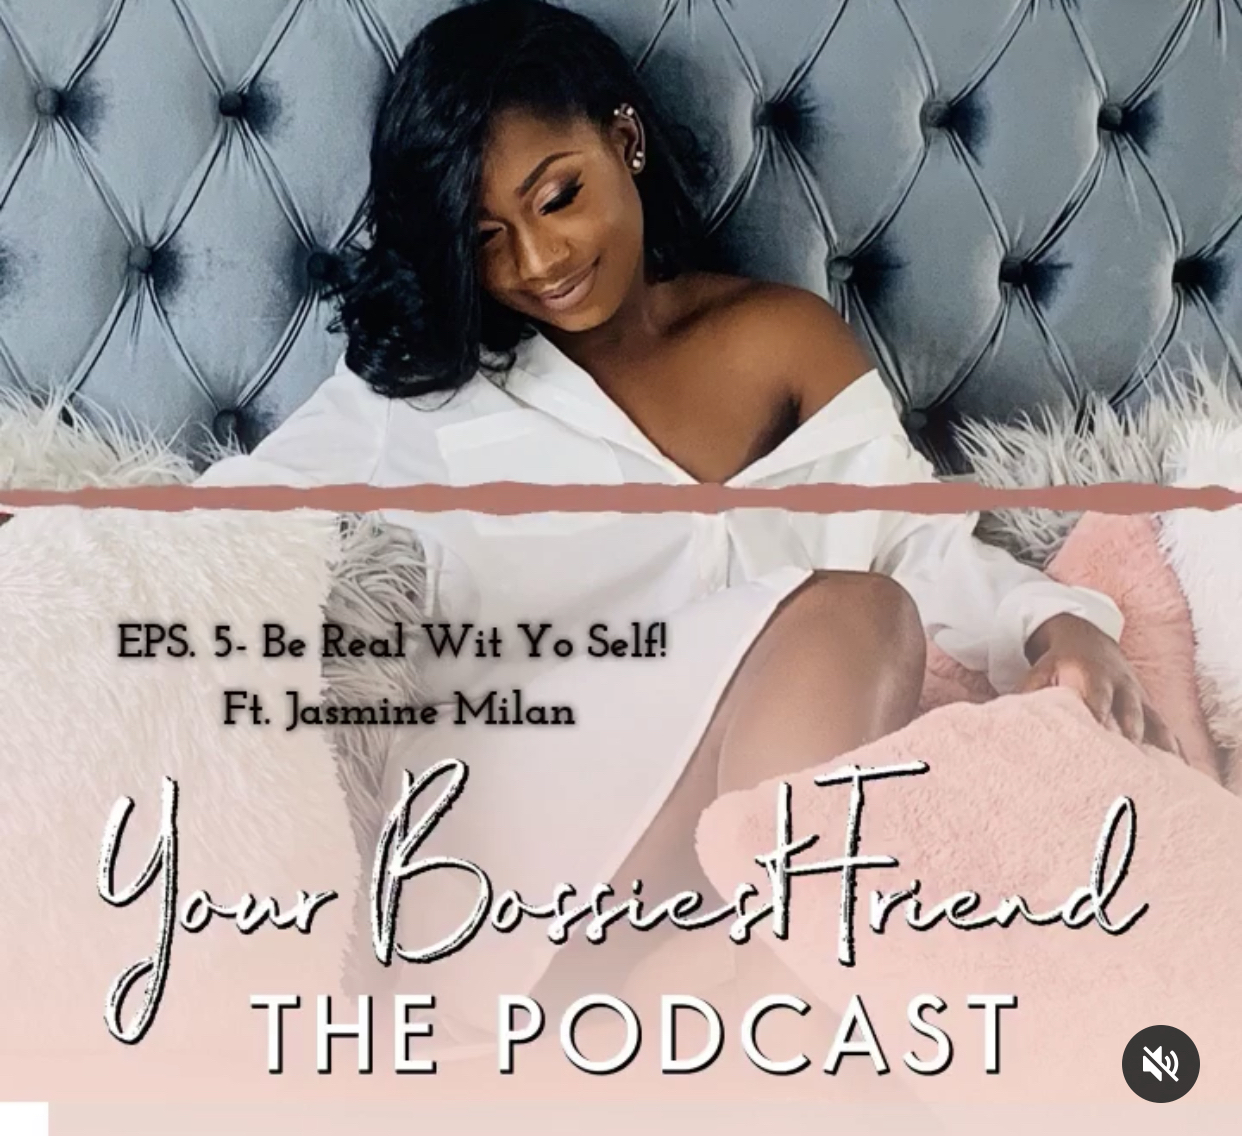 Jasmine Milan + Your Bossiest Friend THE PODCAST